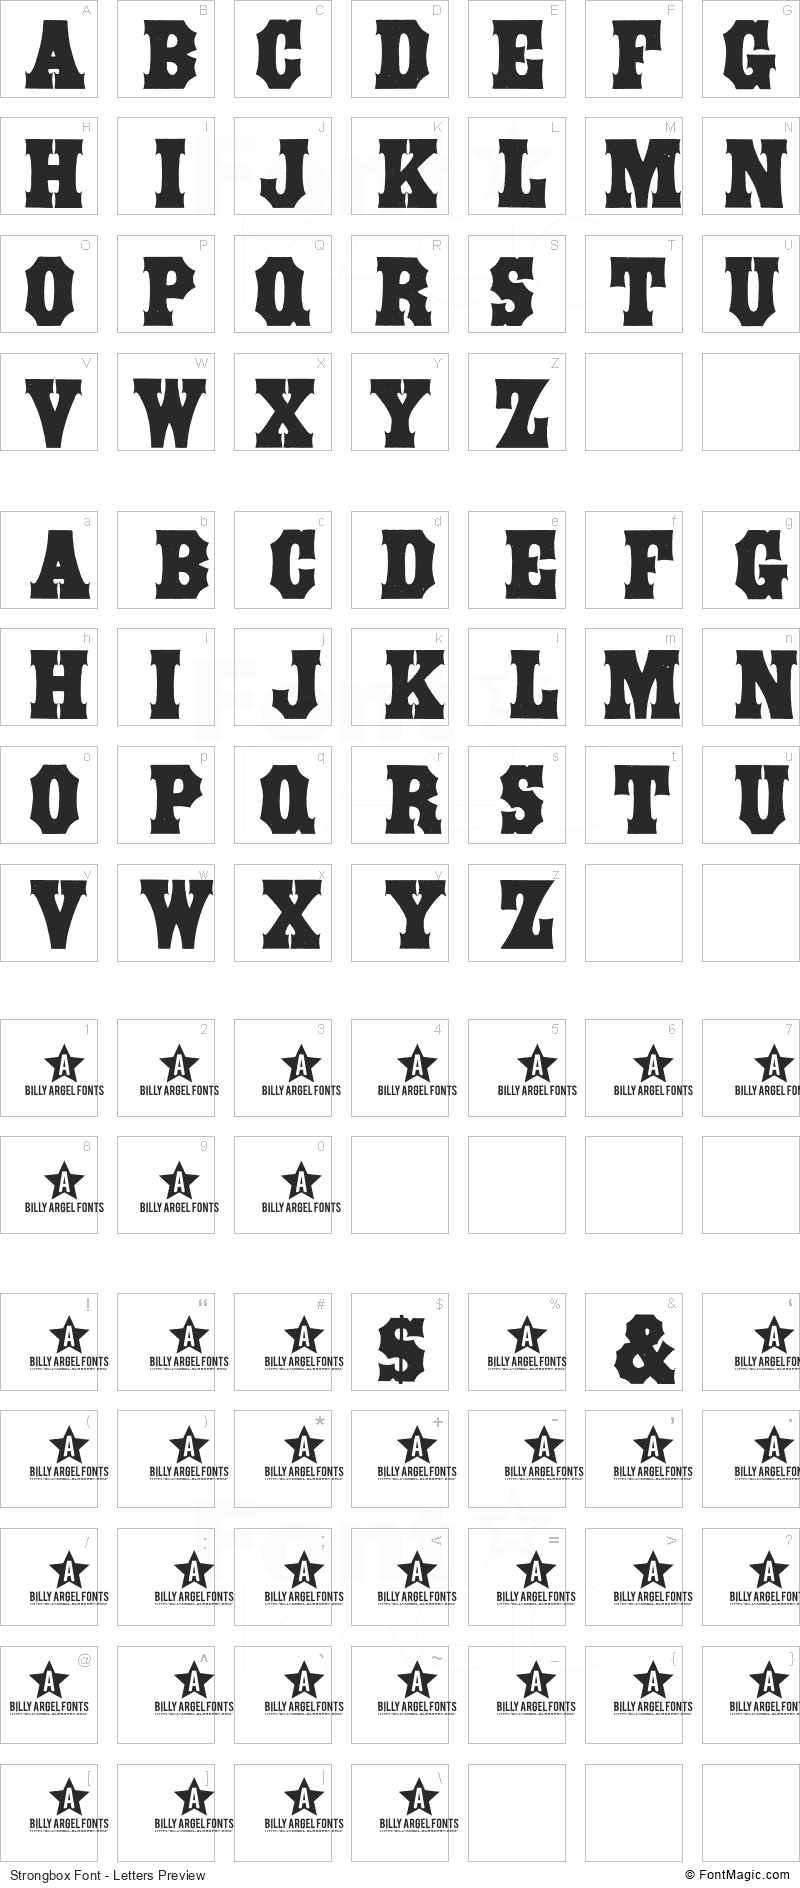 Strongbox Font - All Latters Preview Chart